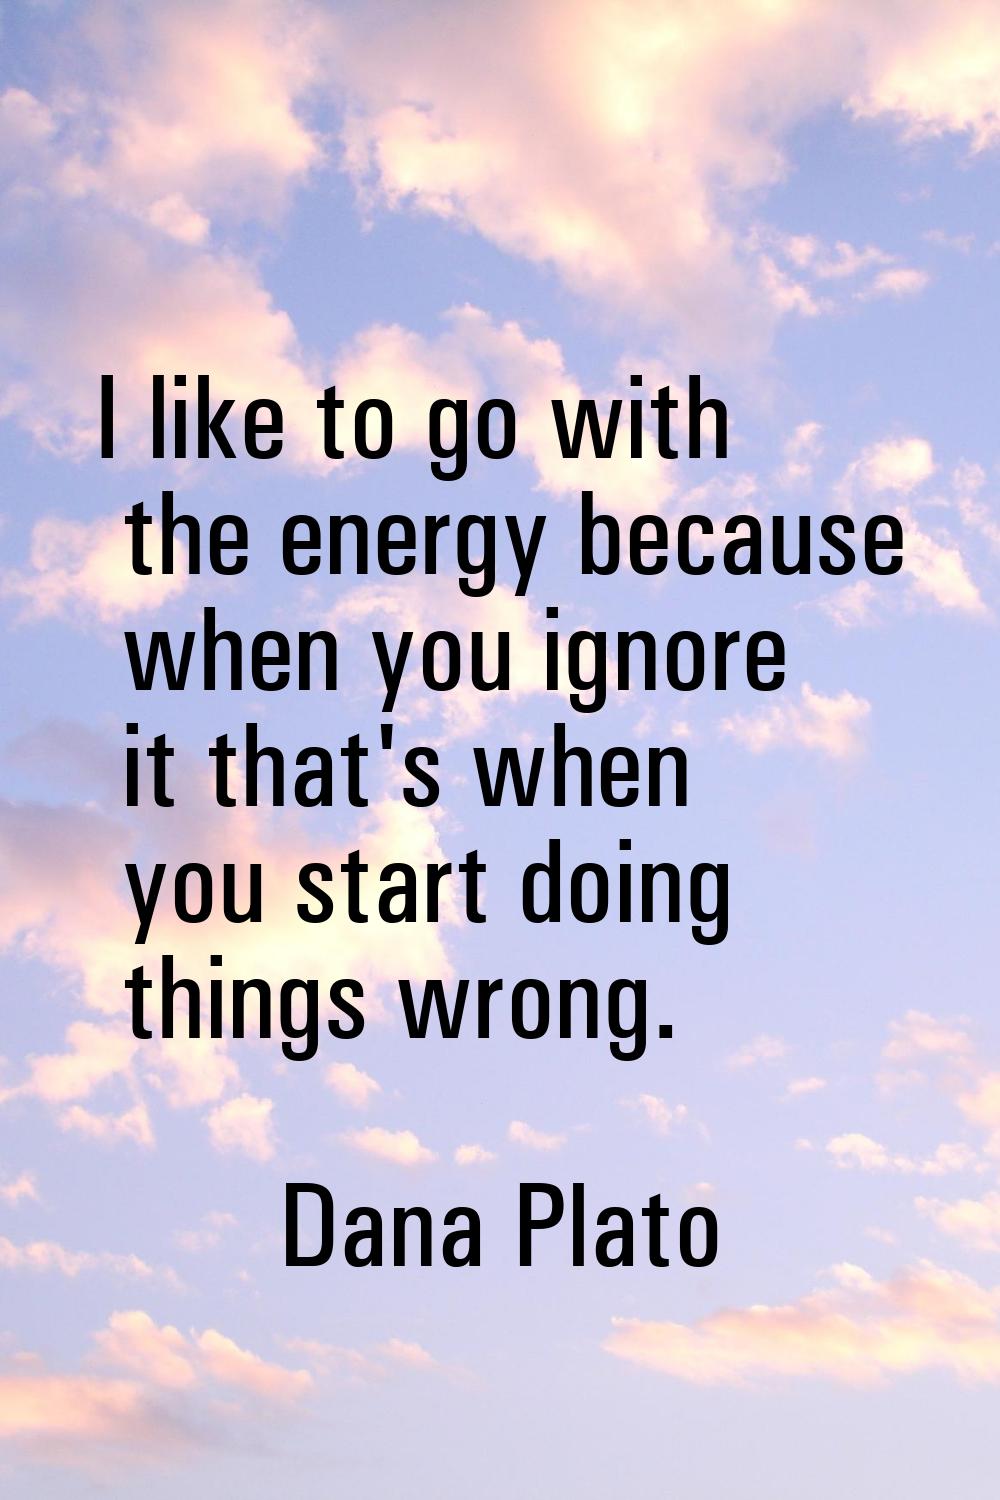 I like to go with the energy because when you ignore it that's when you start doing things wrong.